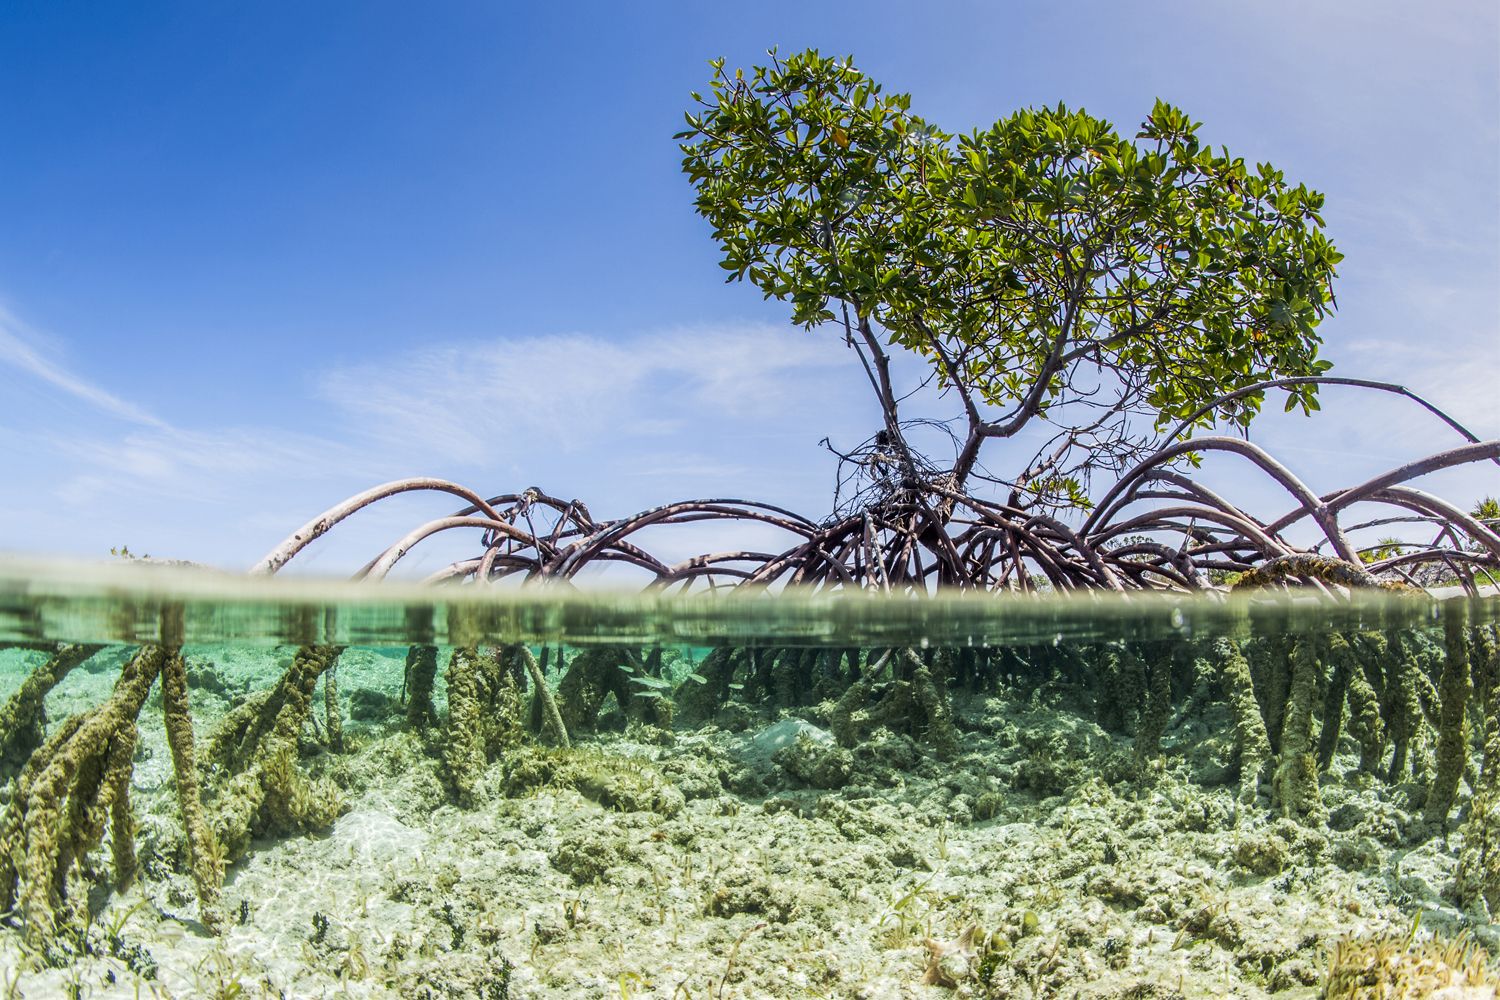 Over and under water photograph of a mangrove tree in clear tropical waters with blue sky in background